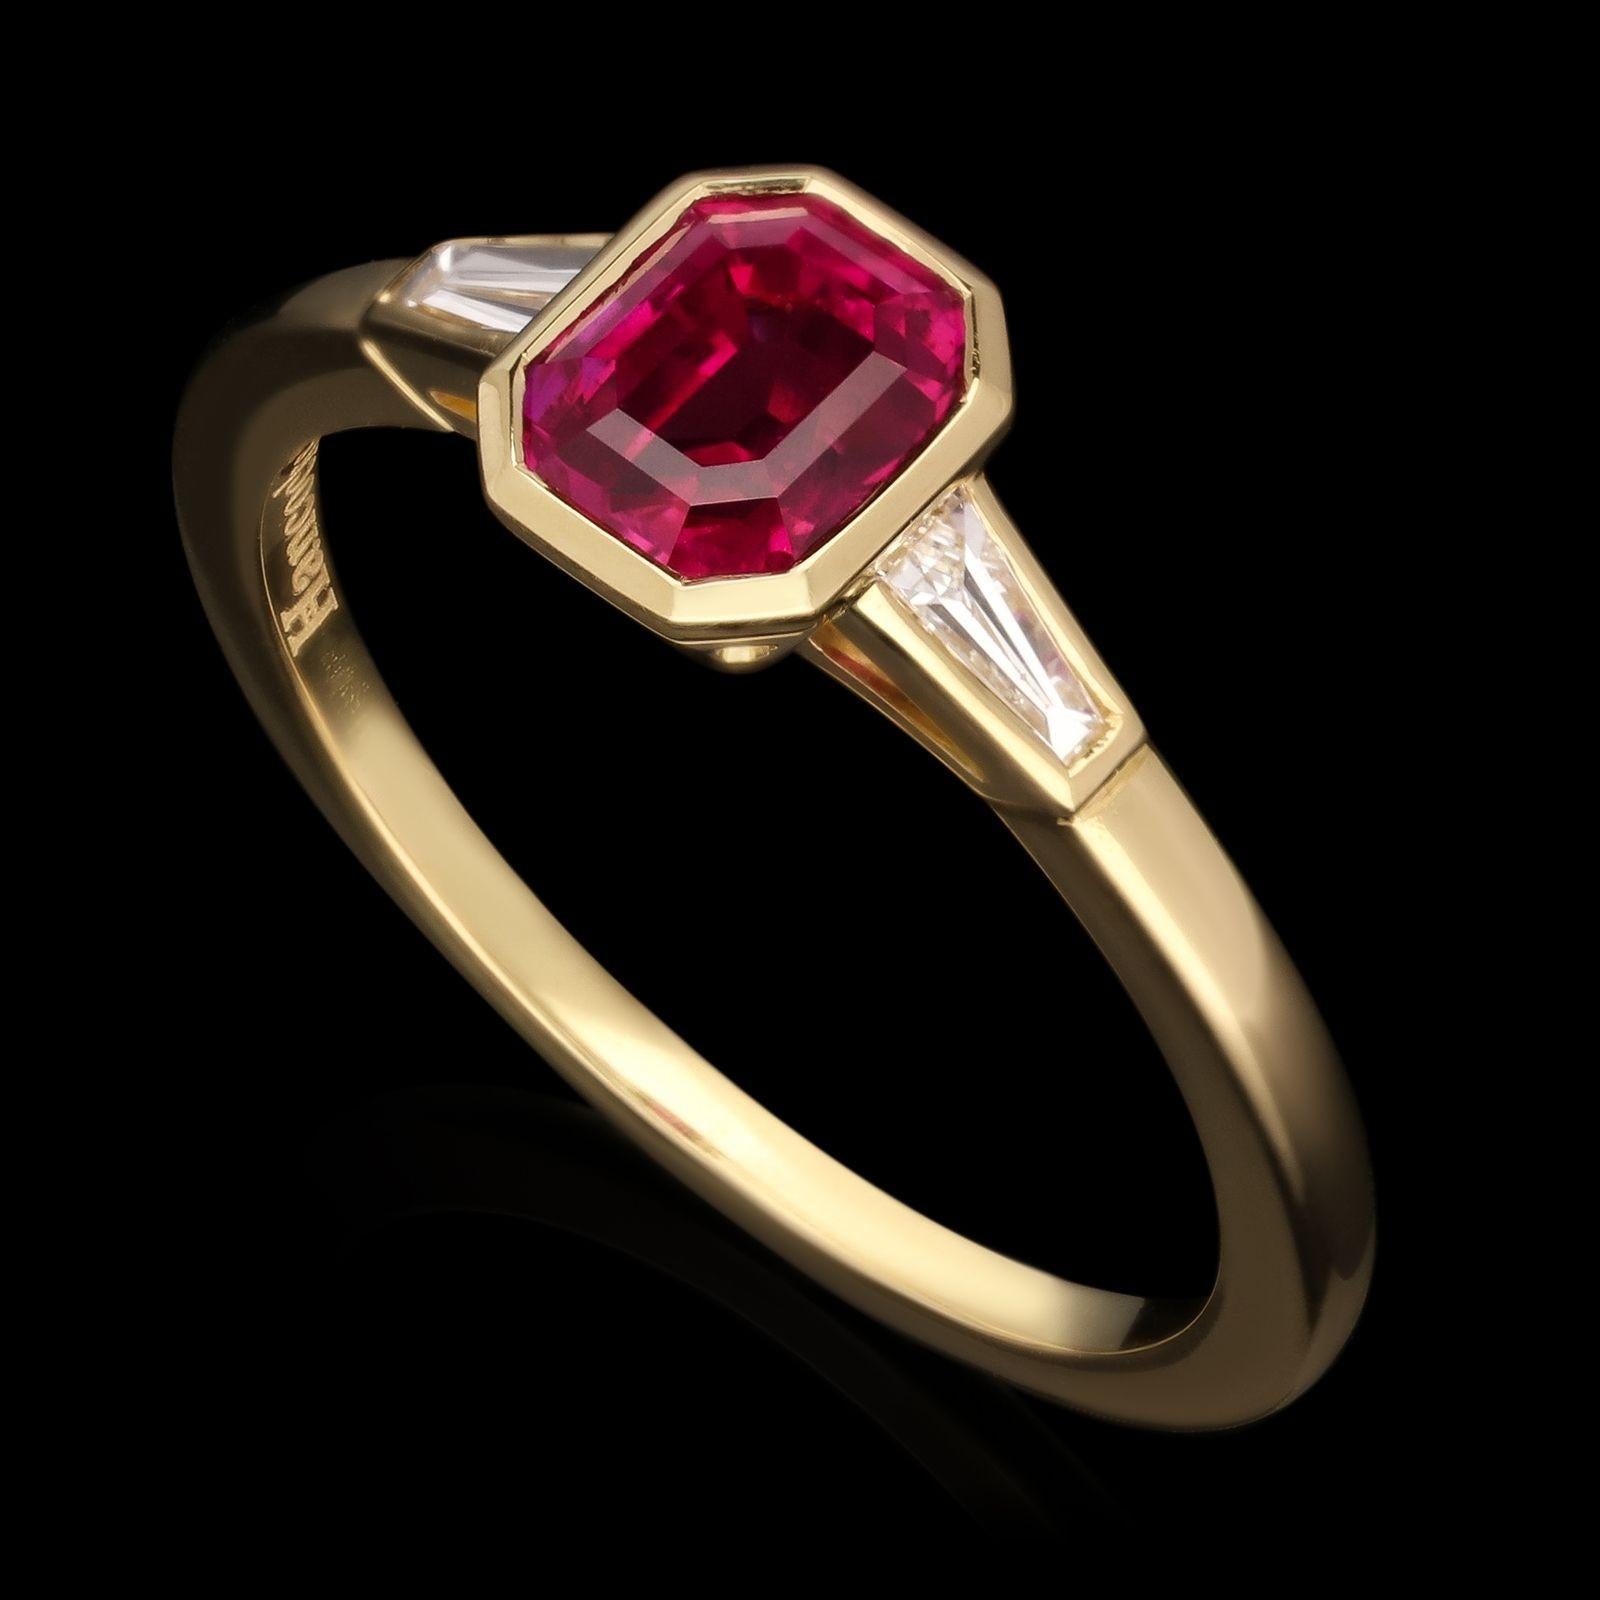 A beautiful ruby and diamond ring by Hancocks, centred on a lovely rich and deeply saturated emerald-cut ruby of Burmese origin weighing 1.09cts rub over set in 18ct gold between elegant tapering shoulders set with tapered baguette cut diamonds also